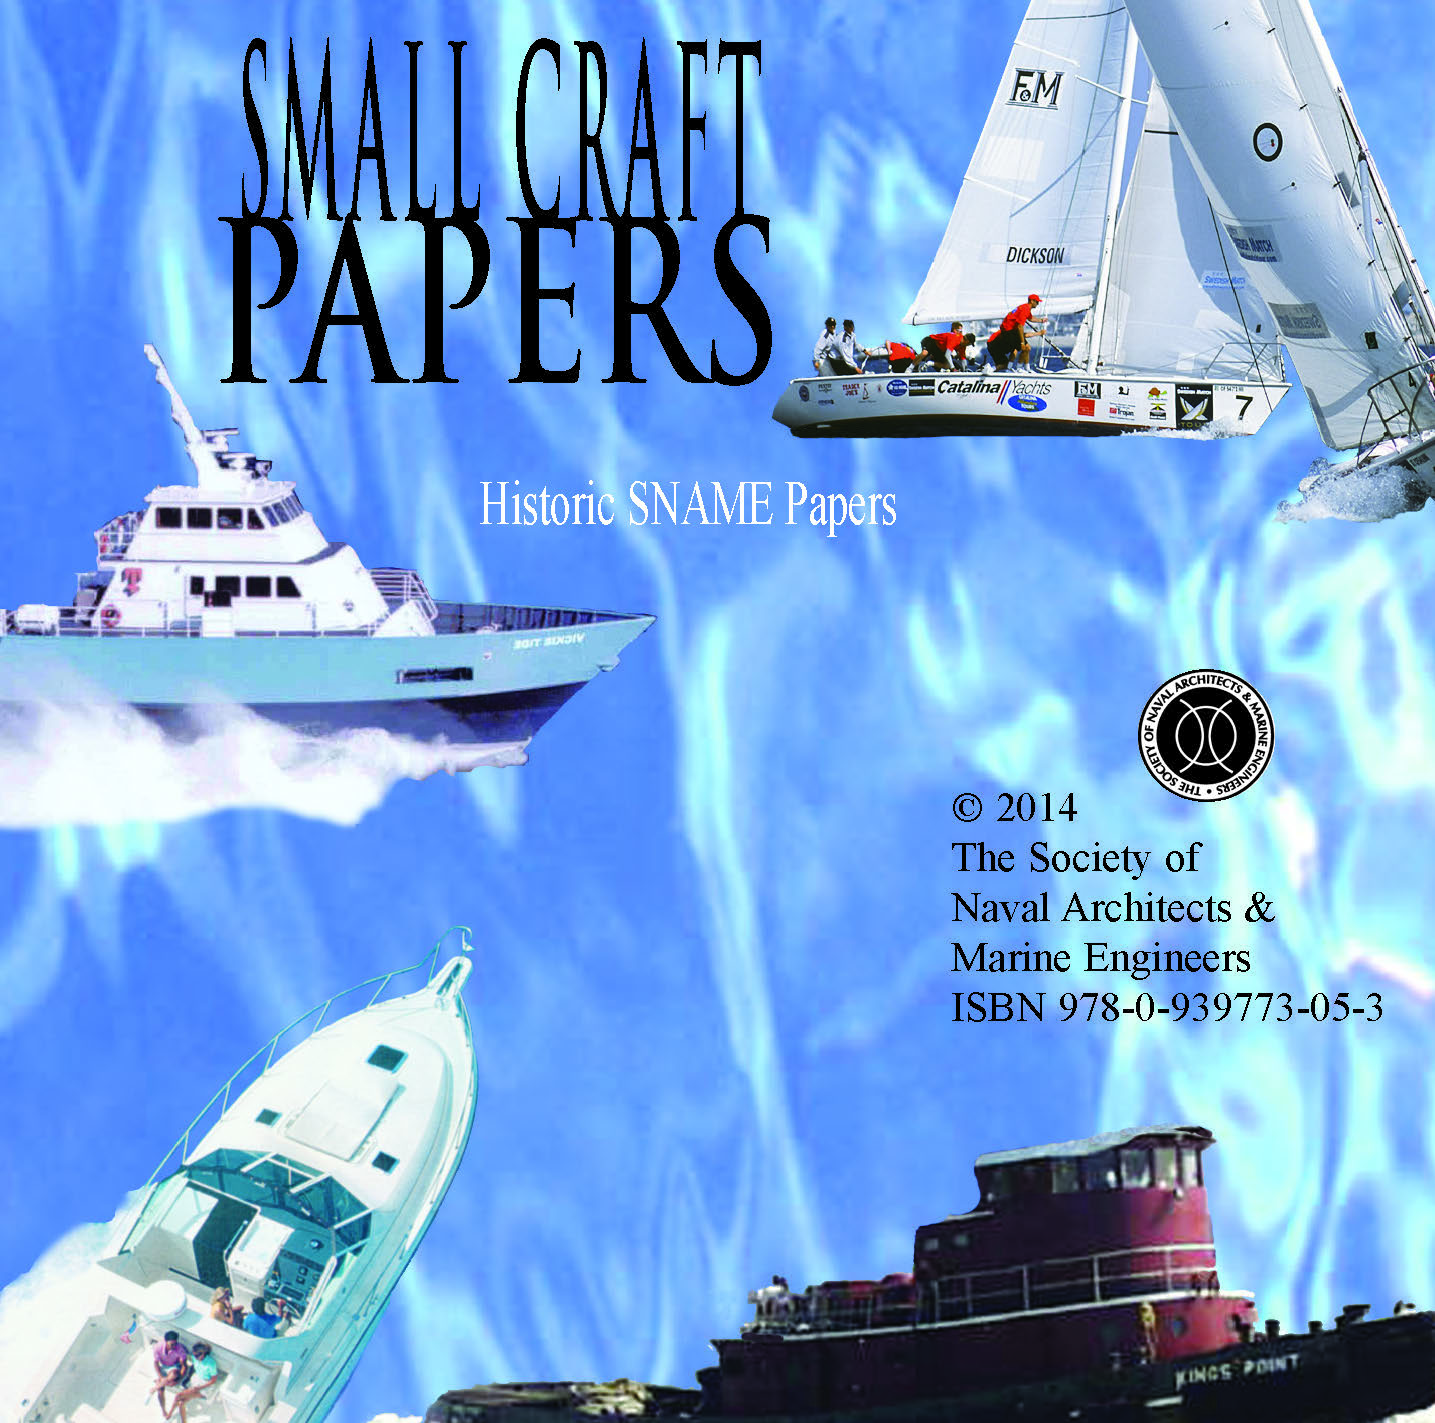 Small Craft Papers: Historic Papers